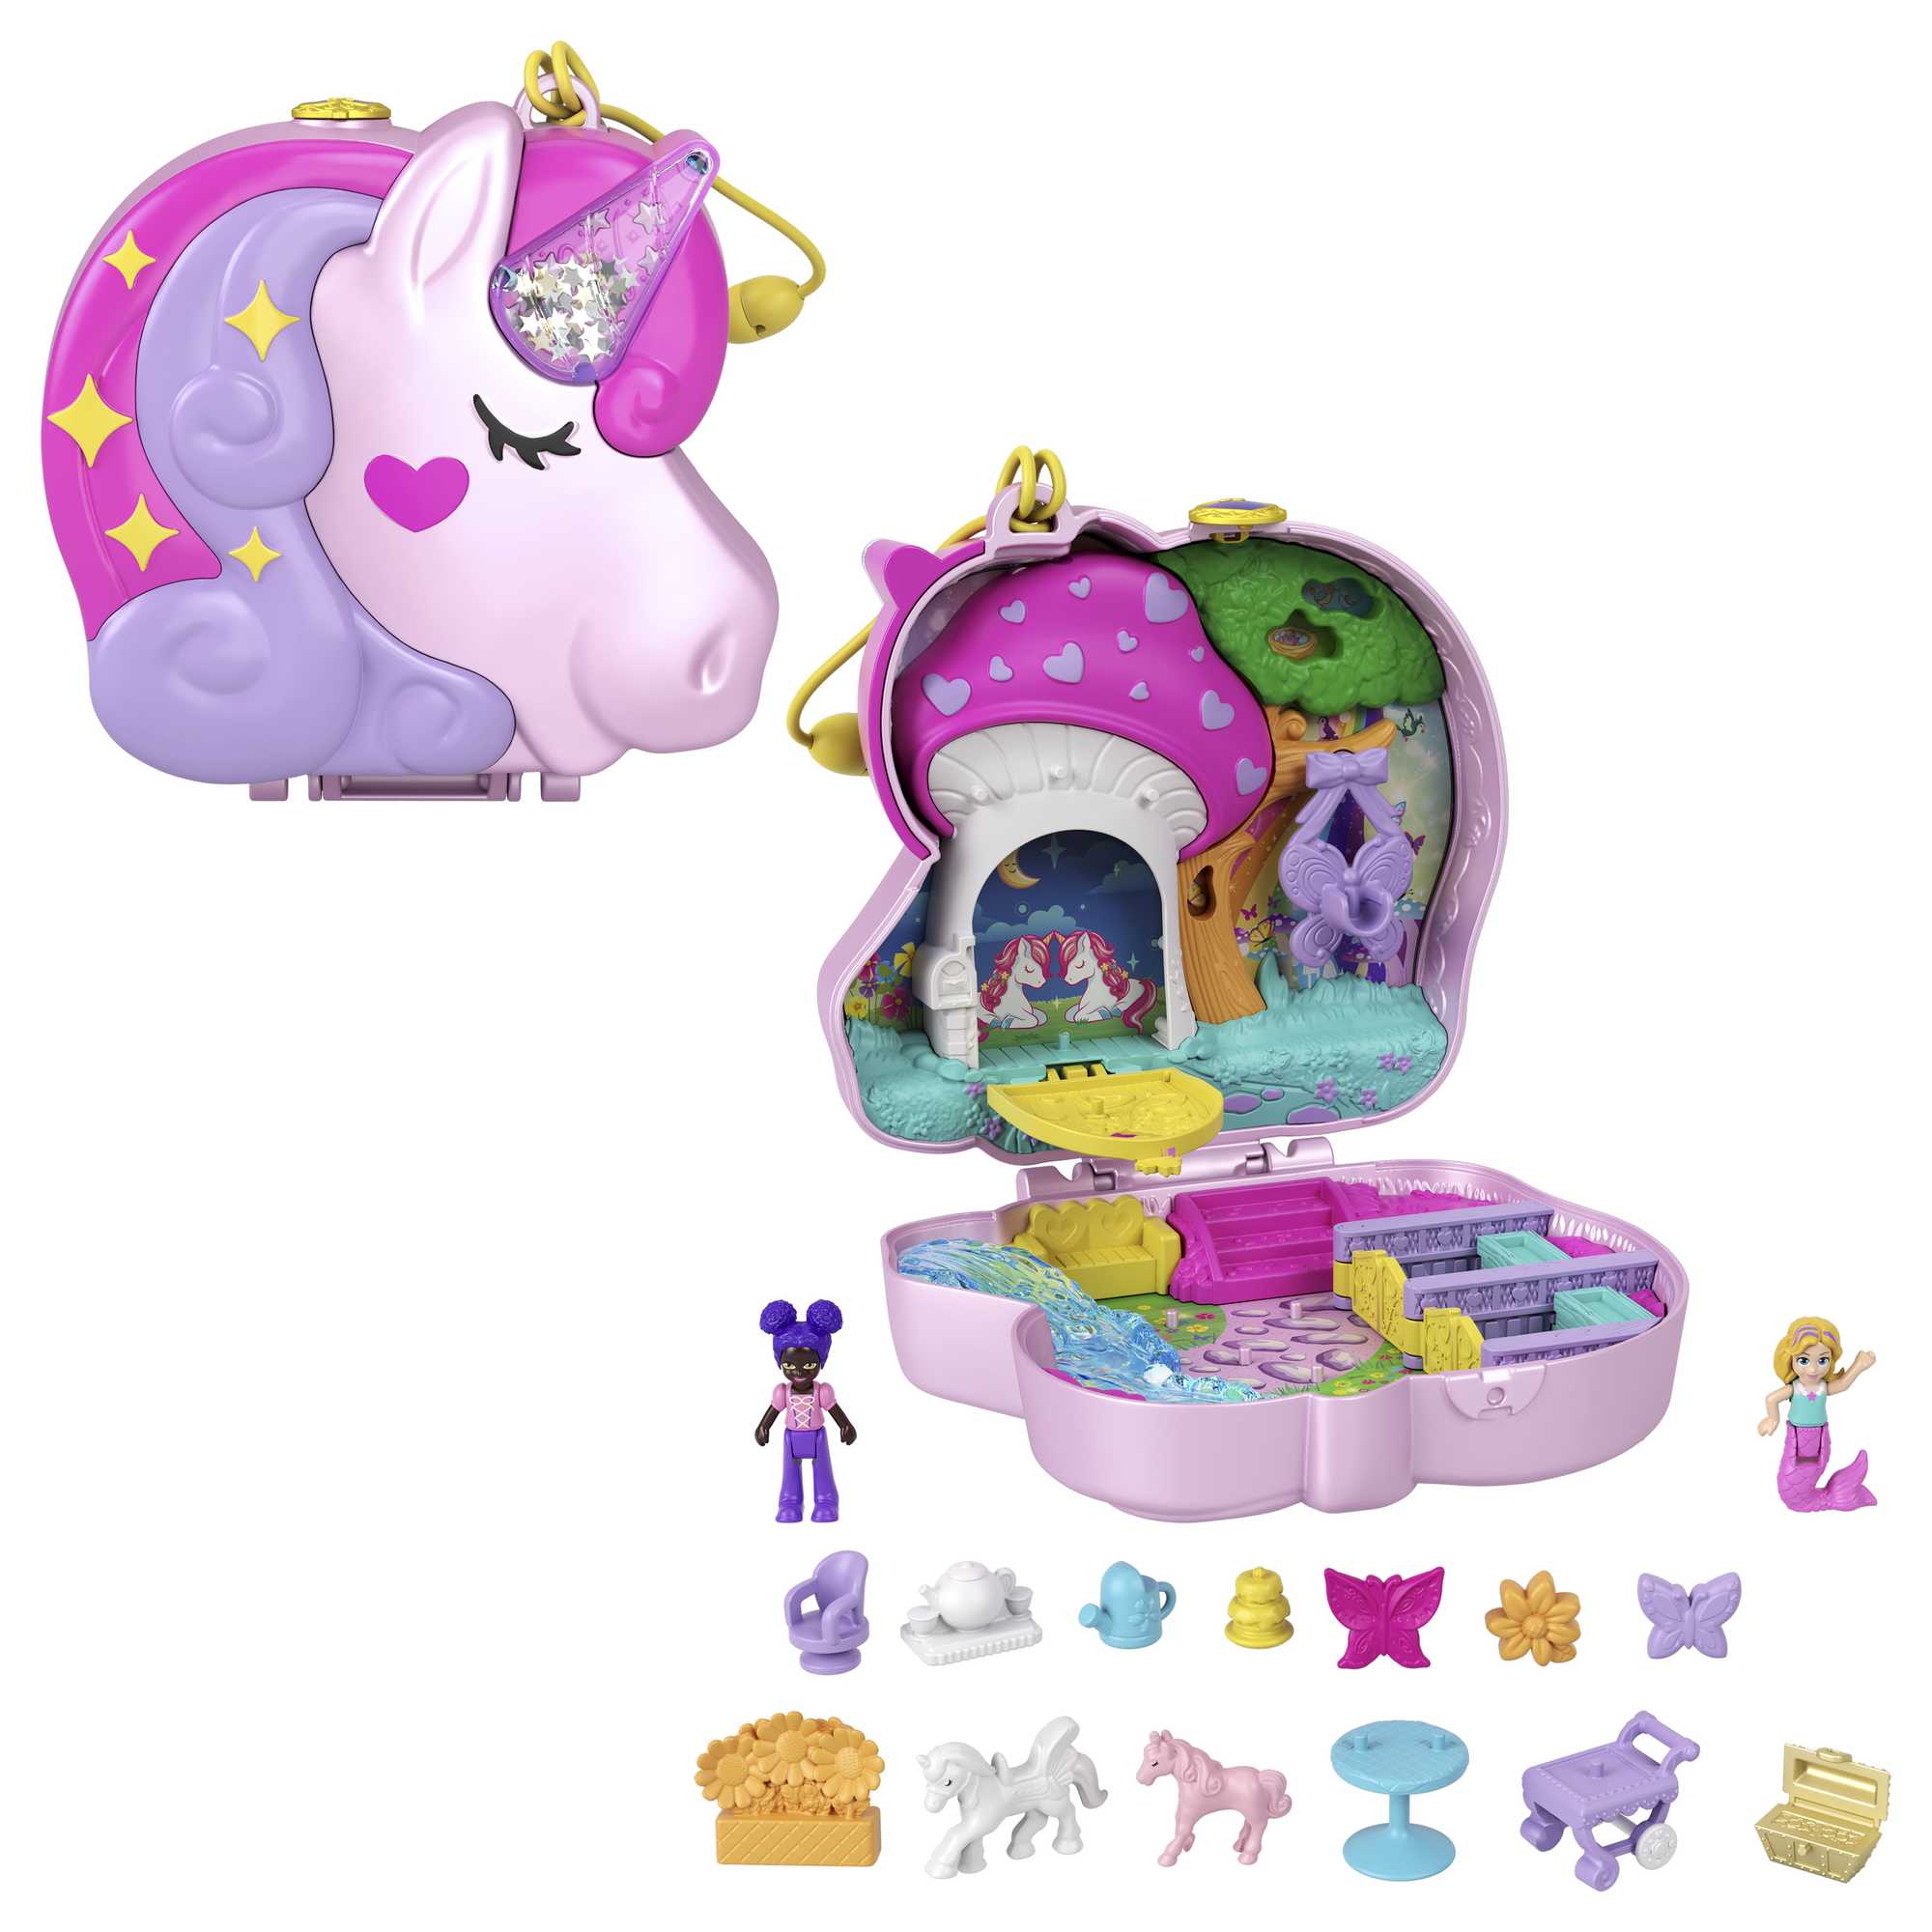 Mattel Polly Pocket Monster High Compact Playset